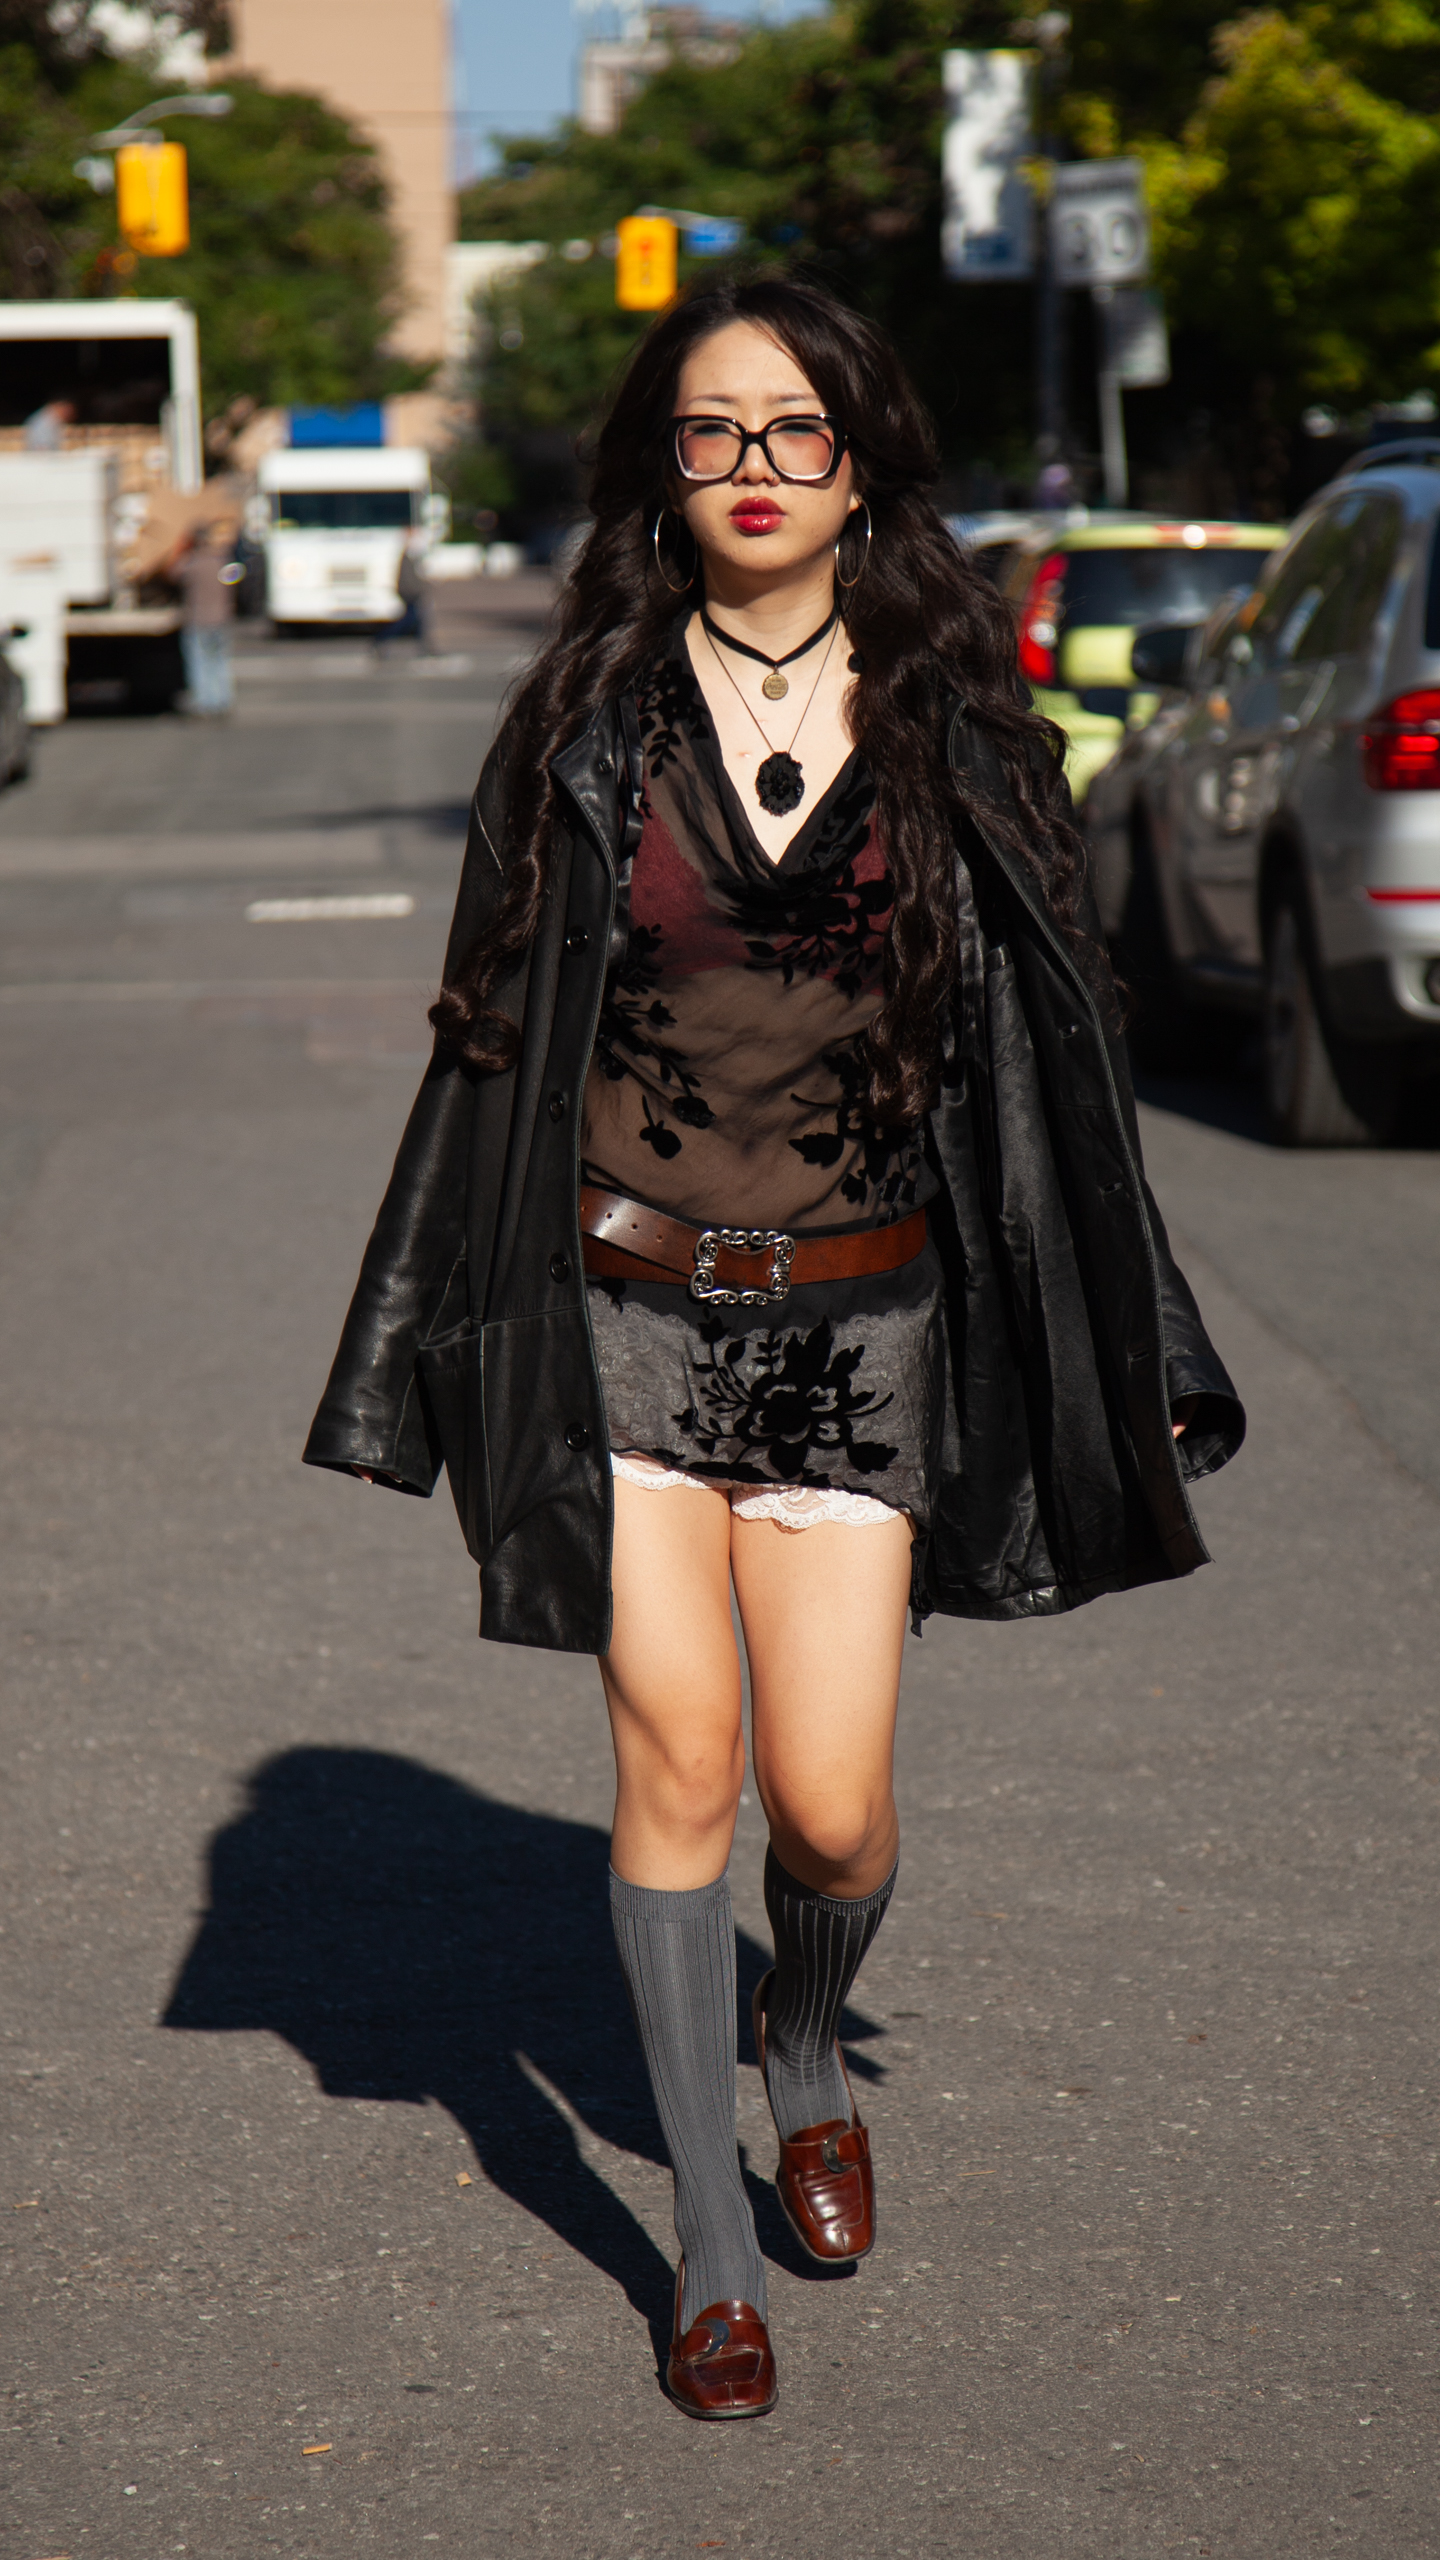 Model walking through campus wears leather jacket with sheer dress over bloomer shorts